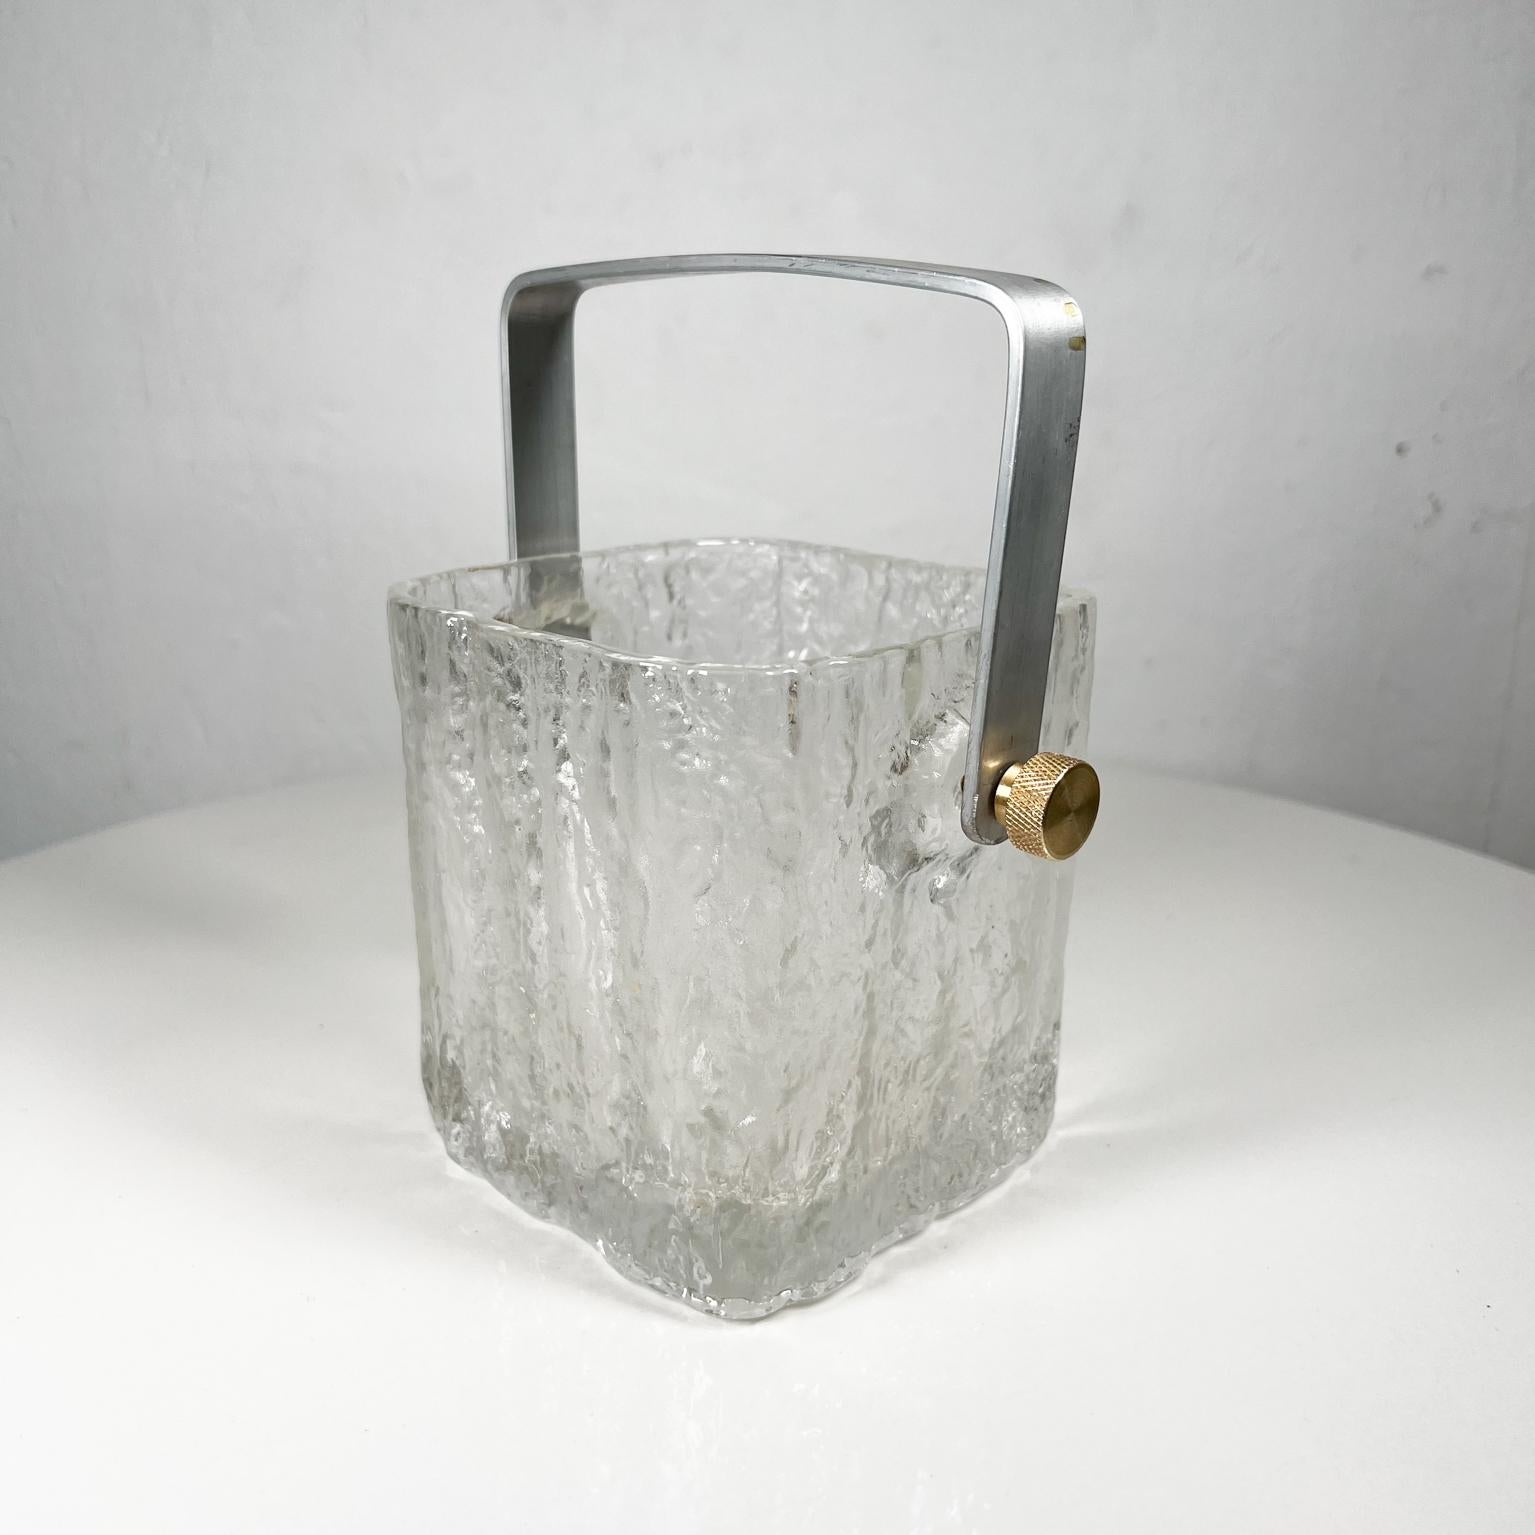 1960s modern ice bucket in Scandinavian crystal art glass
Custom handle in aluminum and brass
Measures: 8.5 tall with handle, 5 H x 4.75 D x 6.75 W
Preowned vintage condition. Custom handle.
Refer to images provided.
 